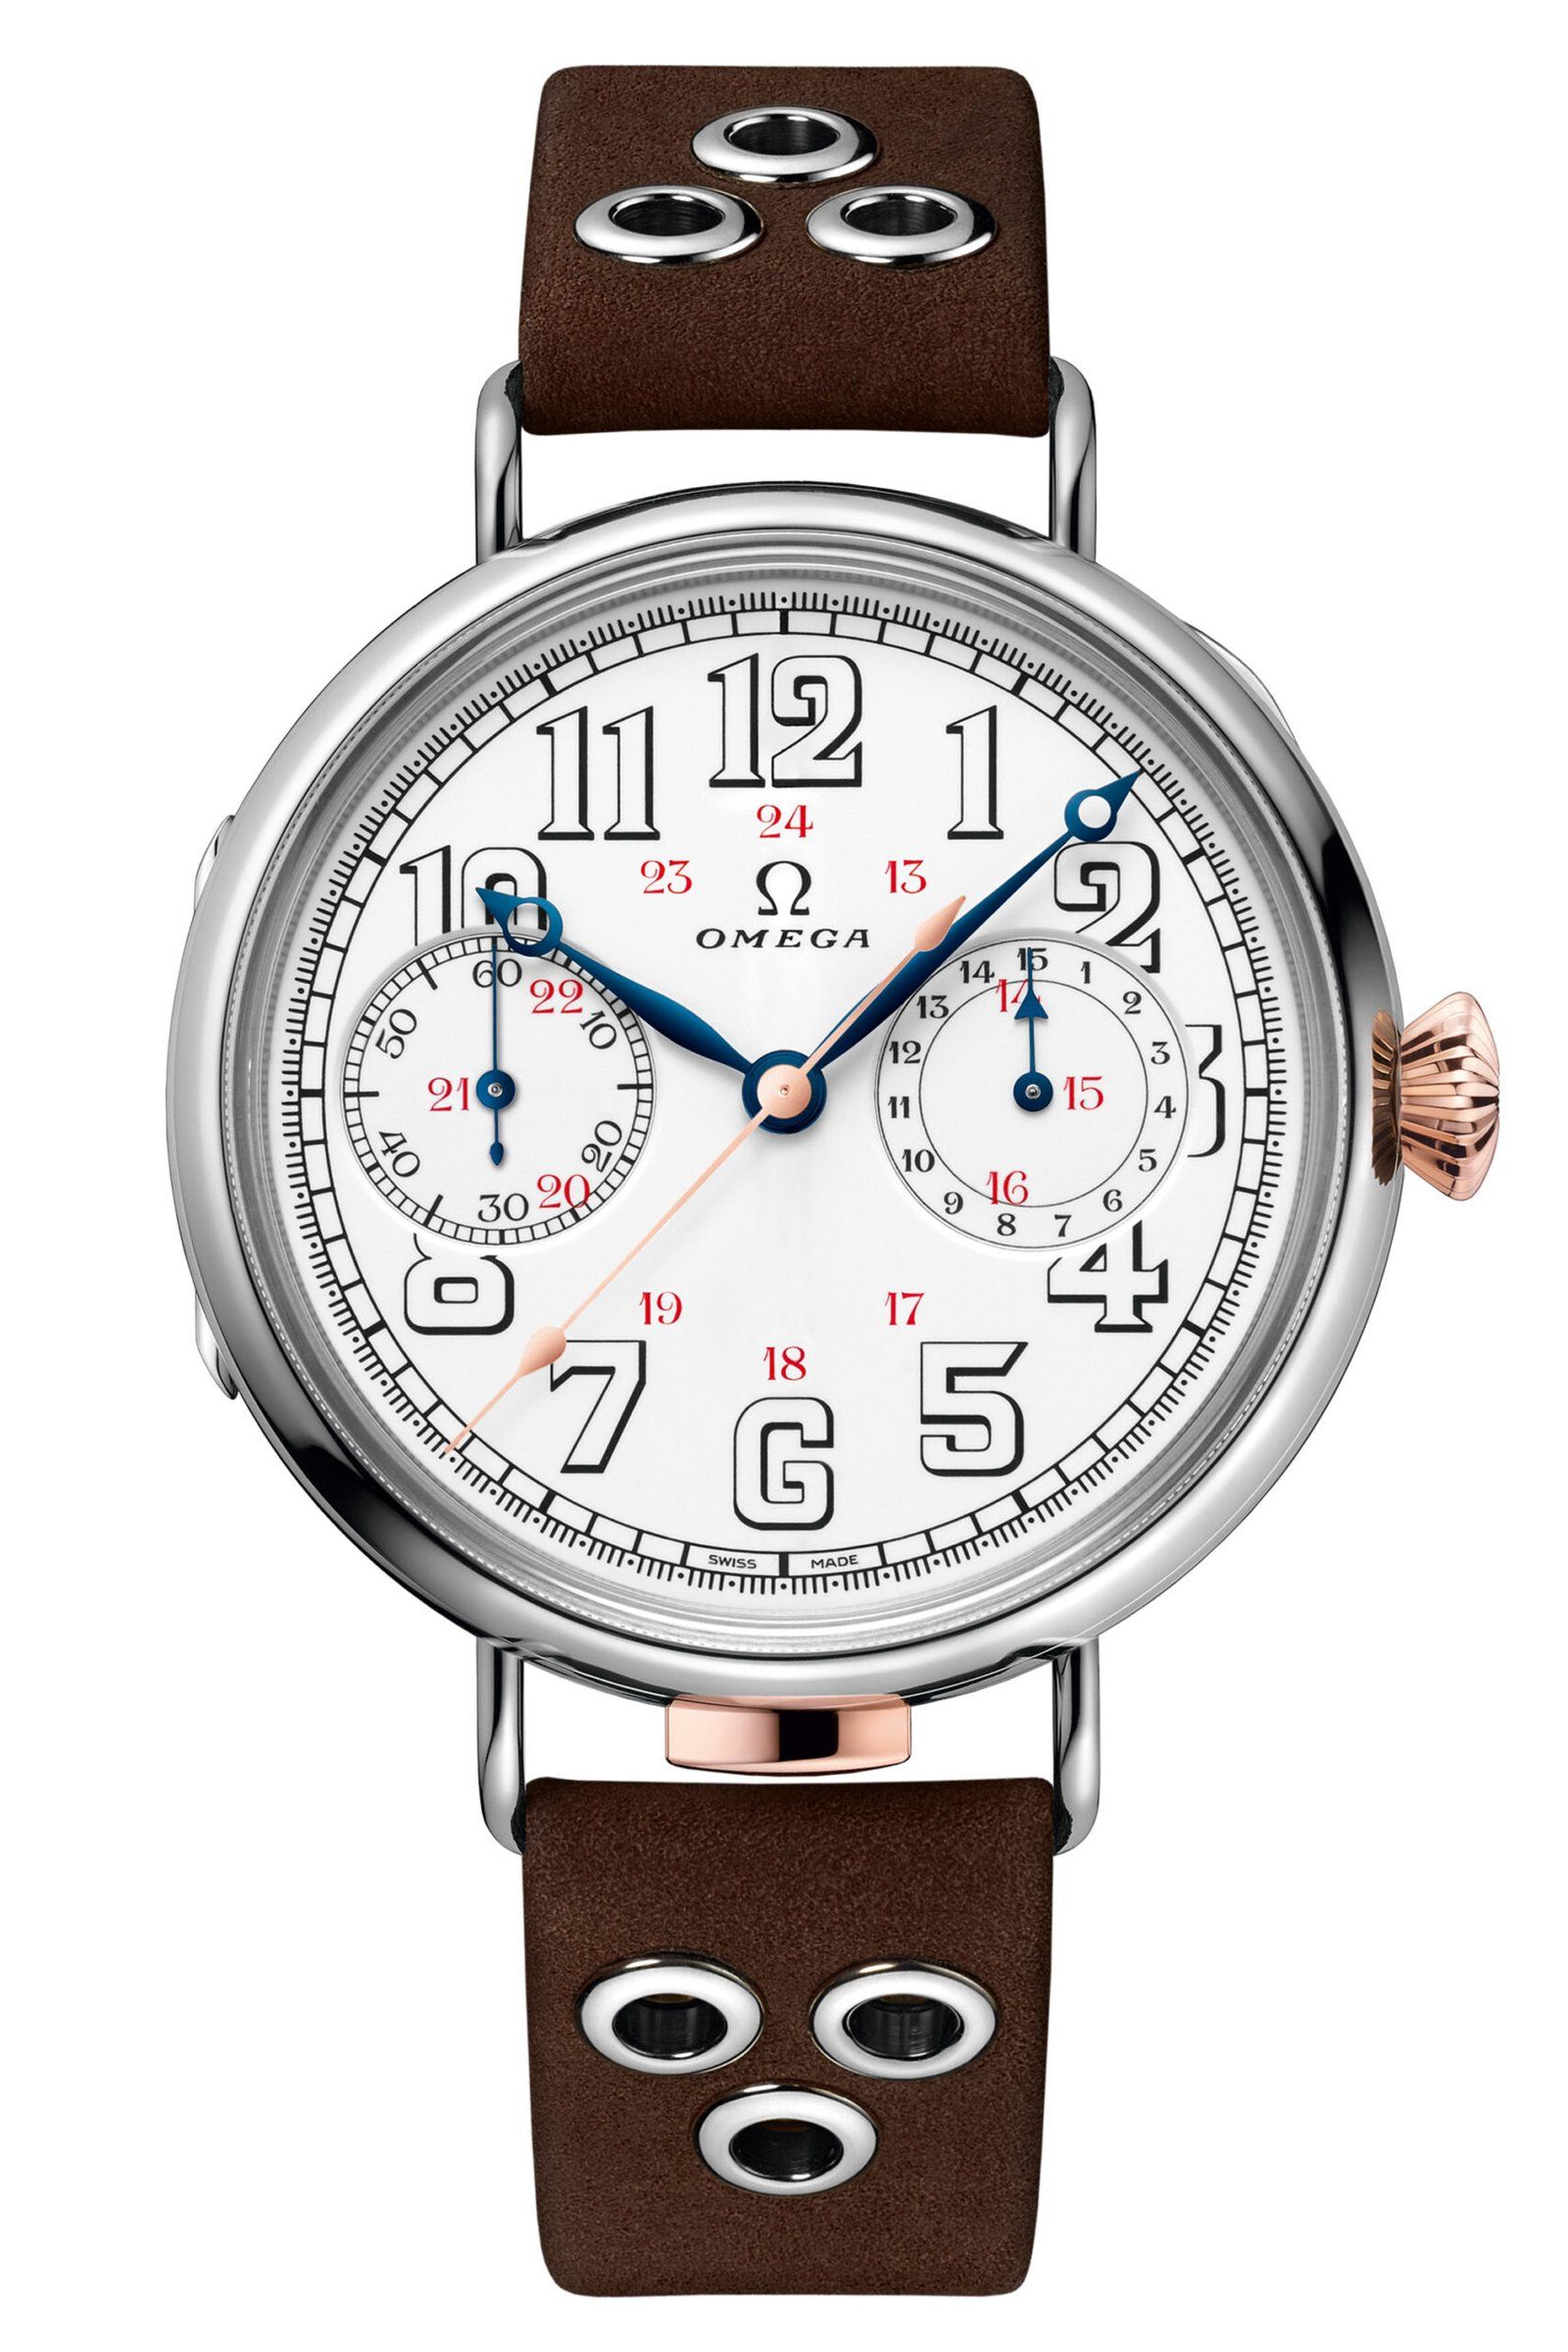 Riveted leather band and the white enamel dial with blued "Empire" hands and hollow Arabic numerals.